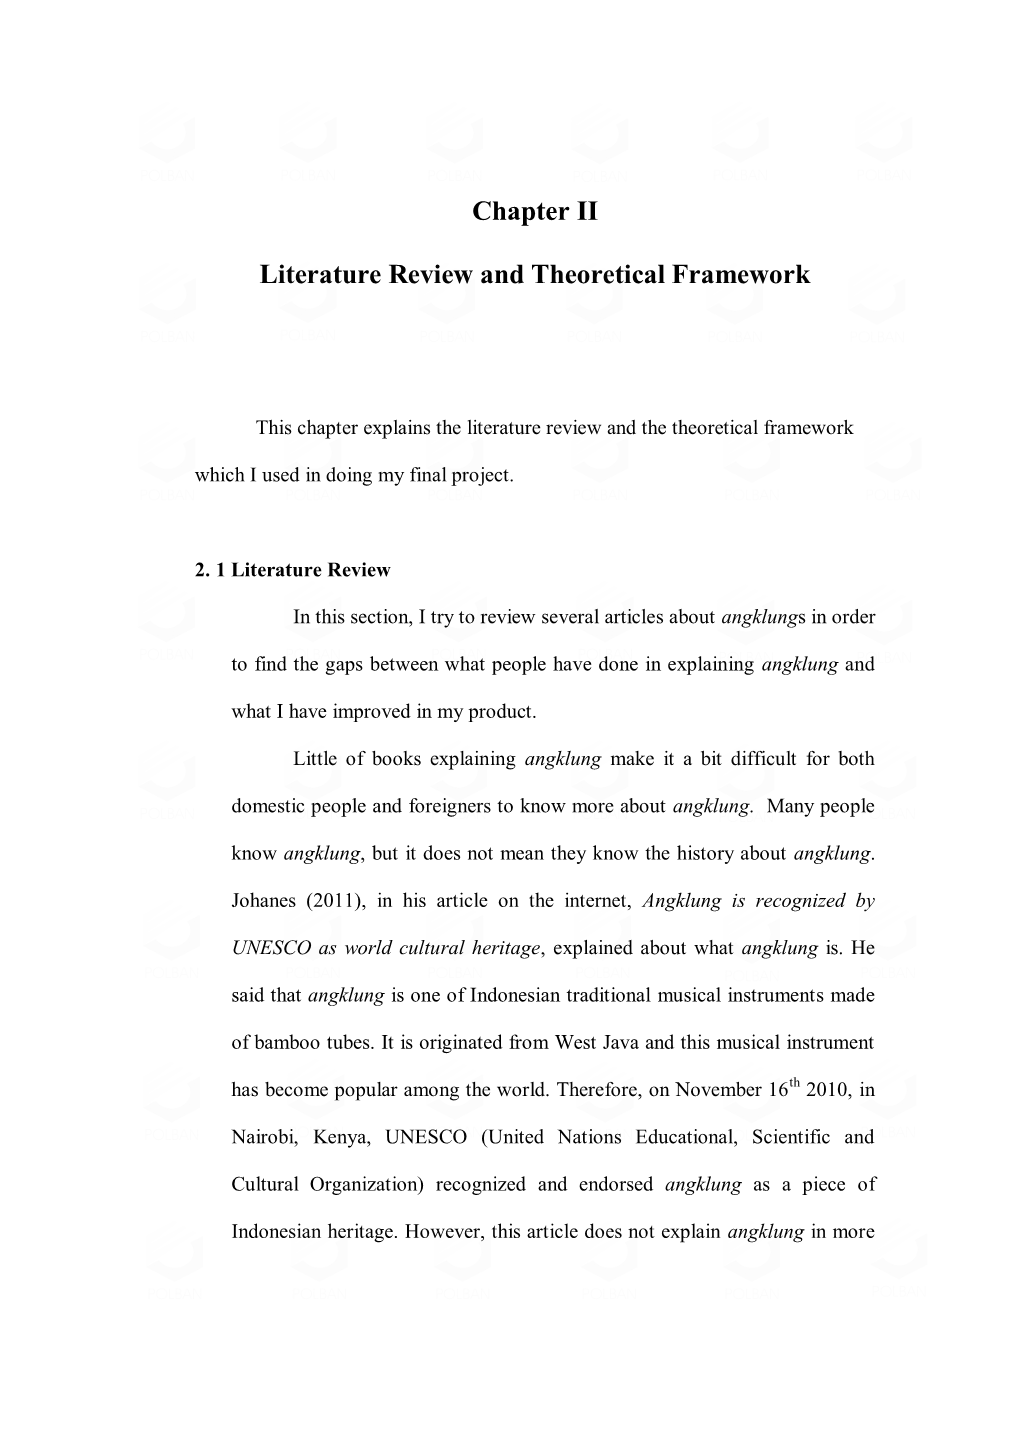 Chapter II Literature Review and Theoretical Framework